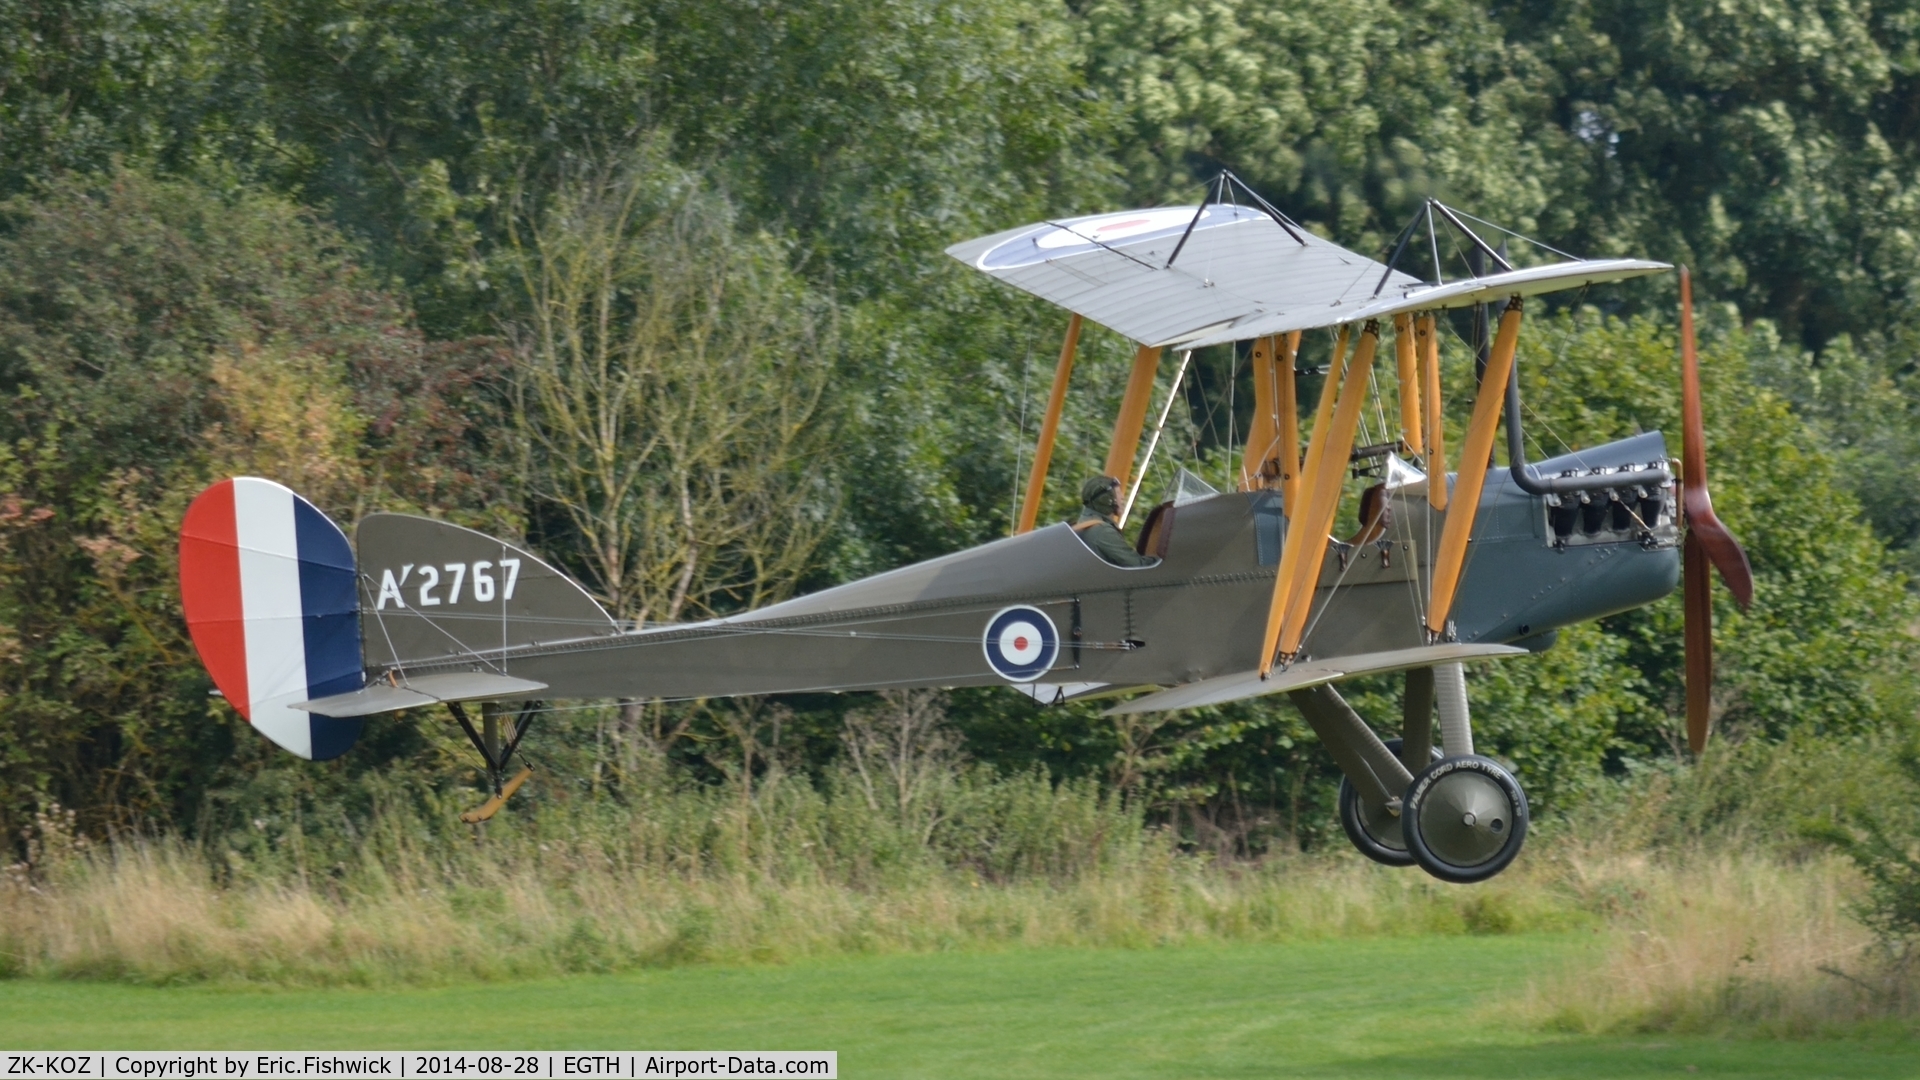 ZK-KOZ, 2014 Royal Aircraft Factory BE-2e Replica C/N 752, 42. ZK-KOZ (A'2767) preparing to depart The Shuttleworth Collection.